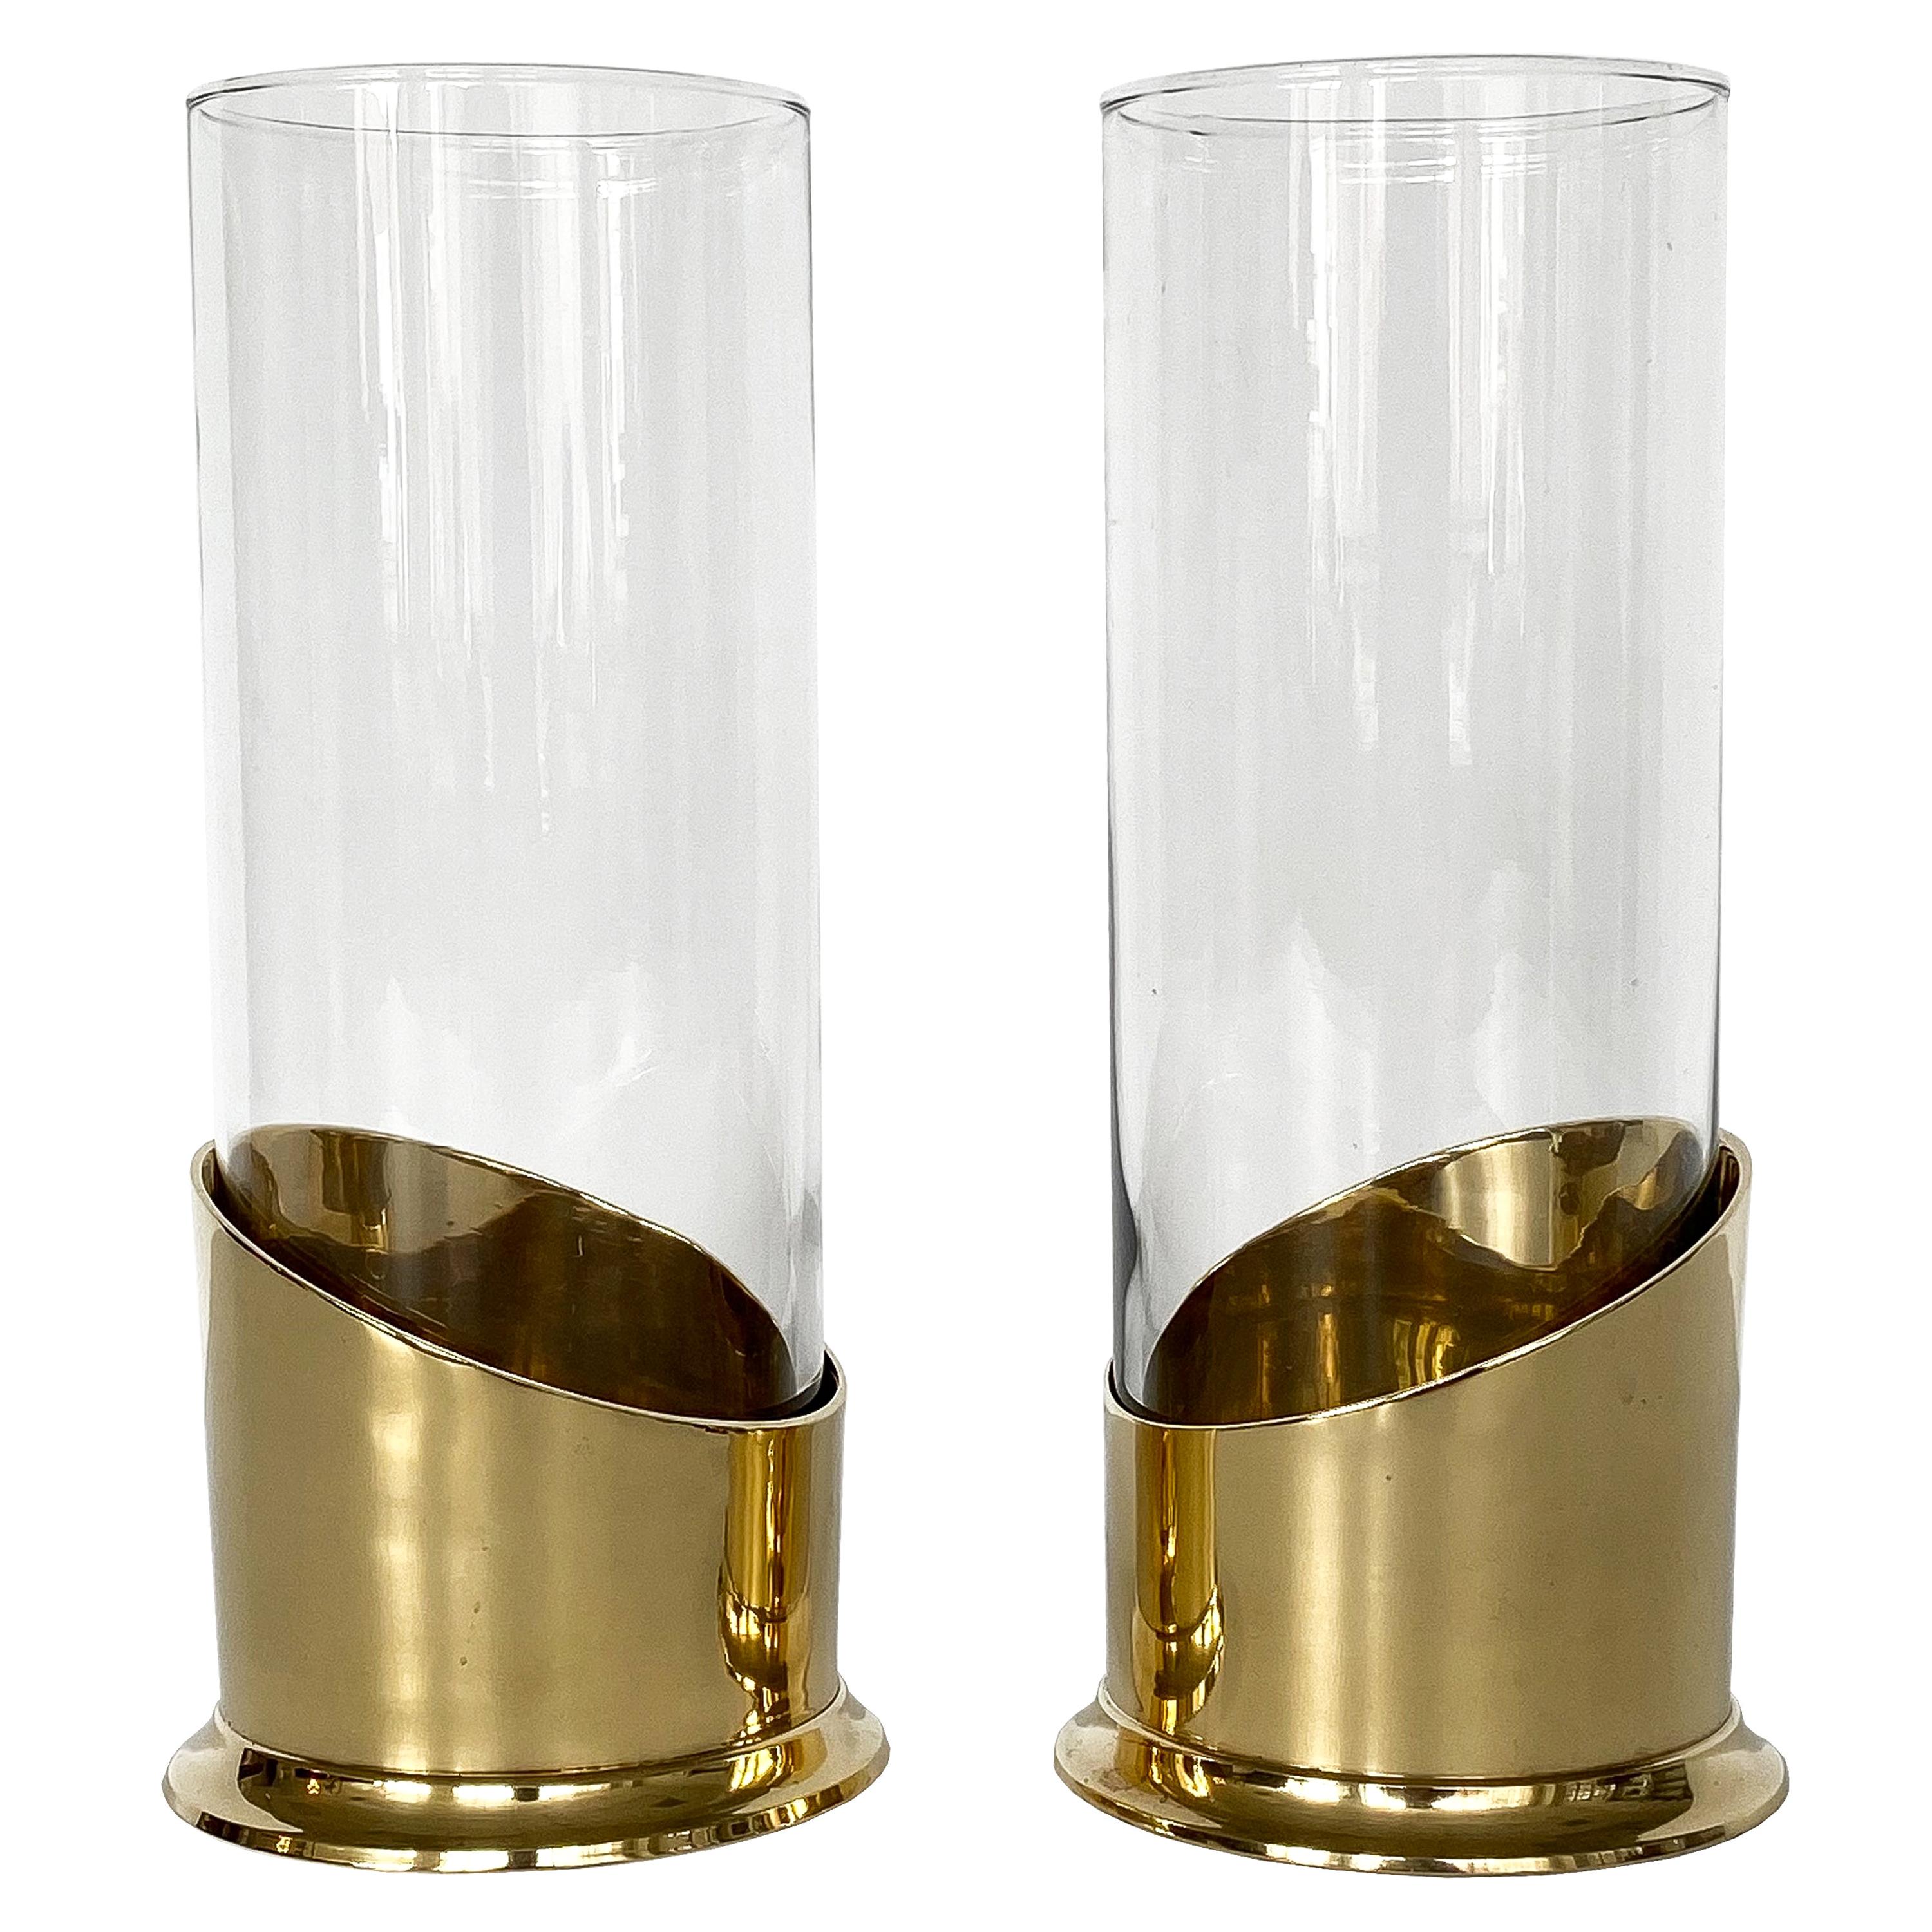 Pair of Brass and Glass Hurricane Candleholders / Vases